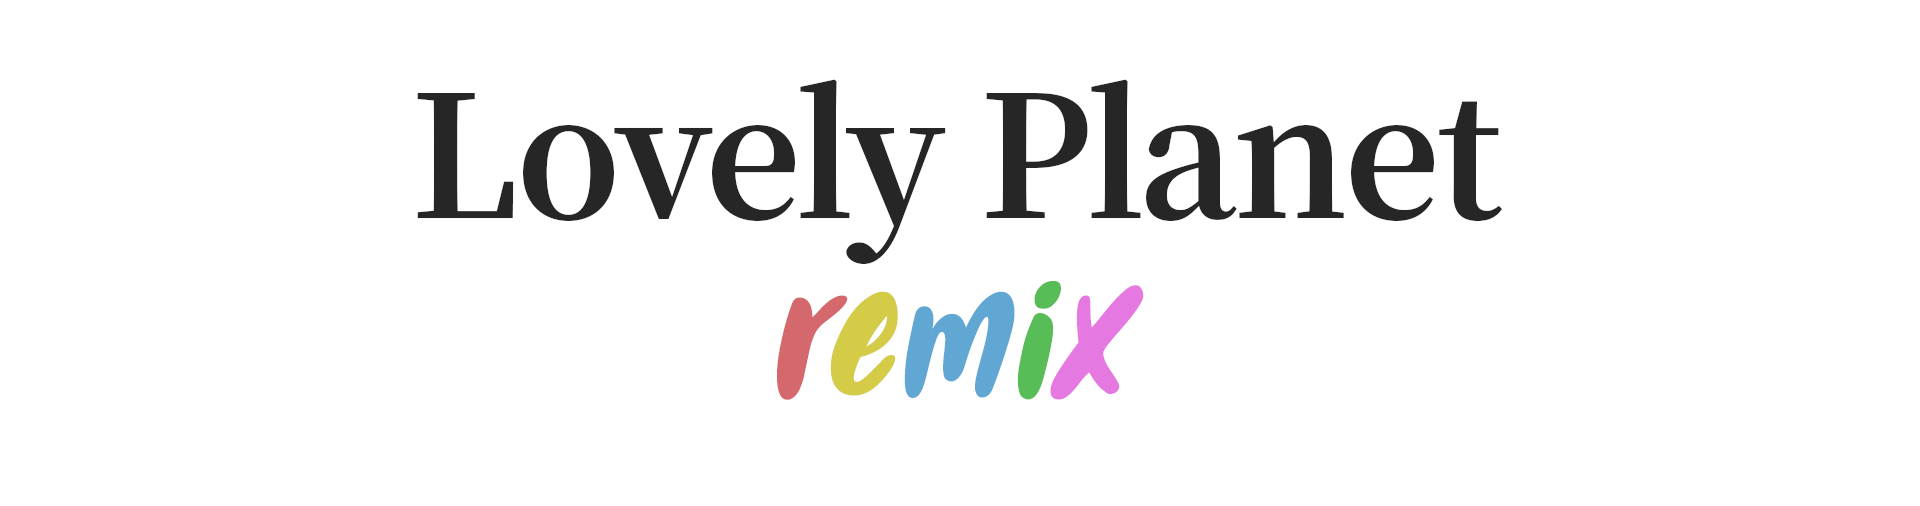 Lovely Planet Remix